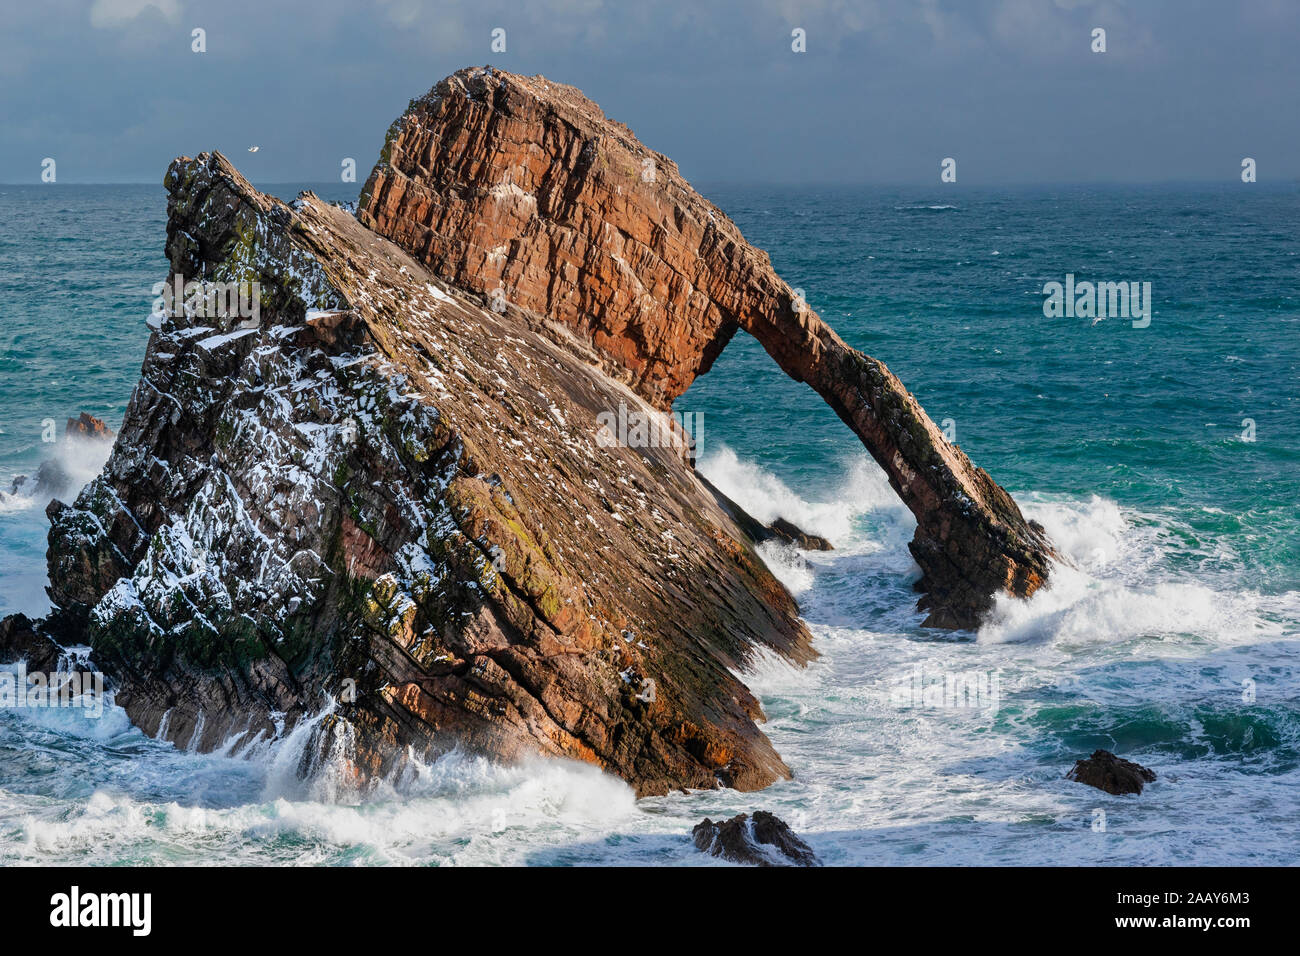 BOW FIDDLE ROCK PORTKNOCKIE MORAY SCOTLAND WINTER SCENE WITH SNOW ON THE ROCK AND A STORMY SEA Stock Photo